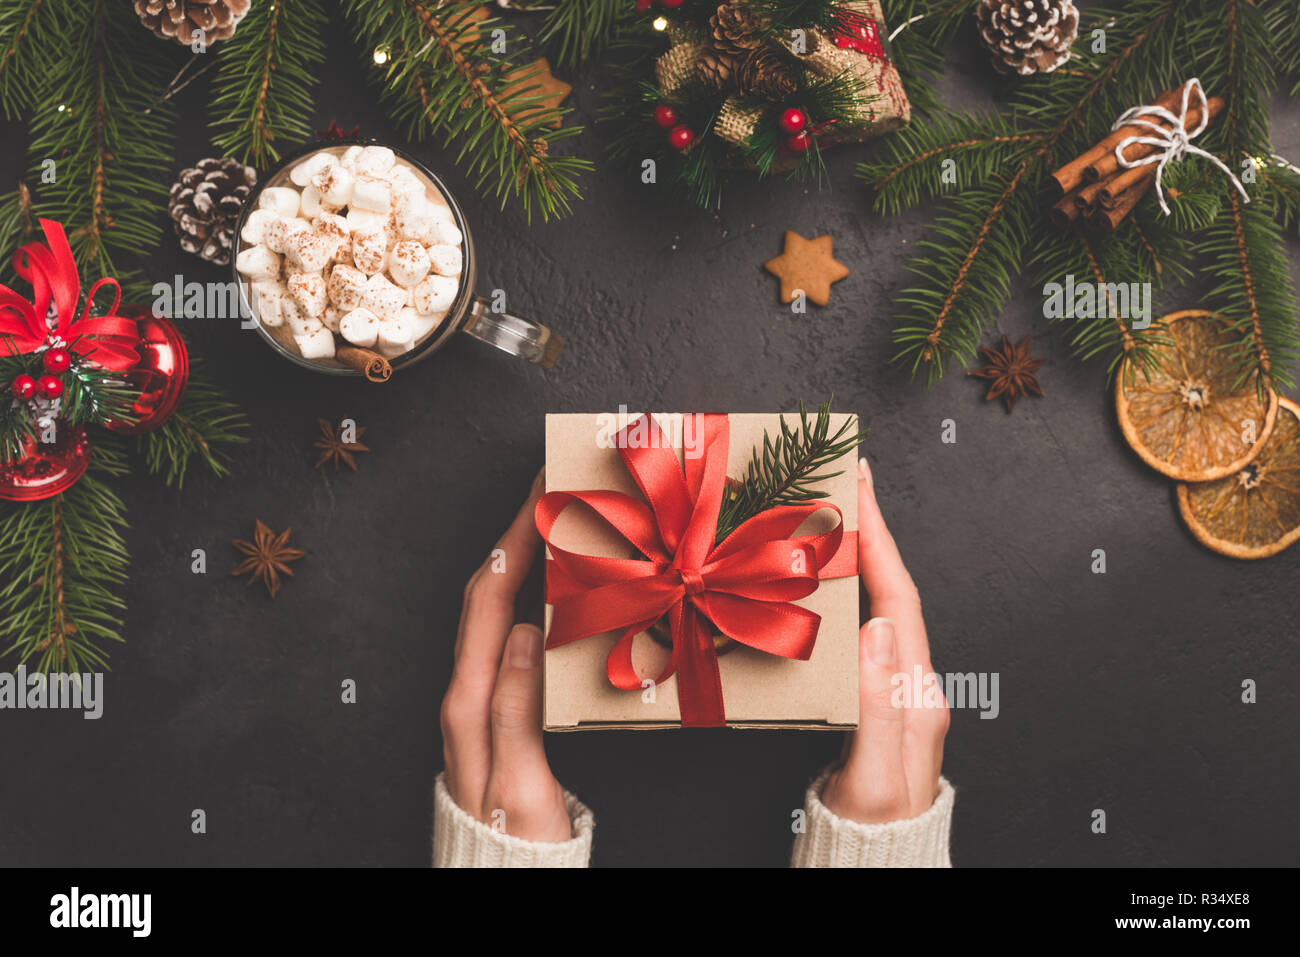 Christmas gift box in craft paper with red ribbon. Winter holidays New Year or Christmas background flat lay composition, person holding gift box Stock Photo